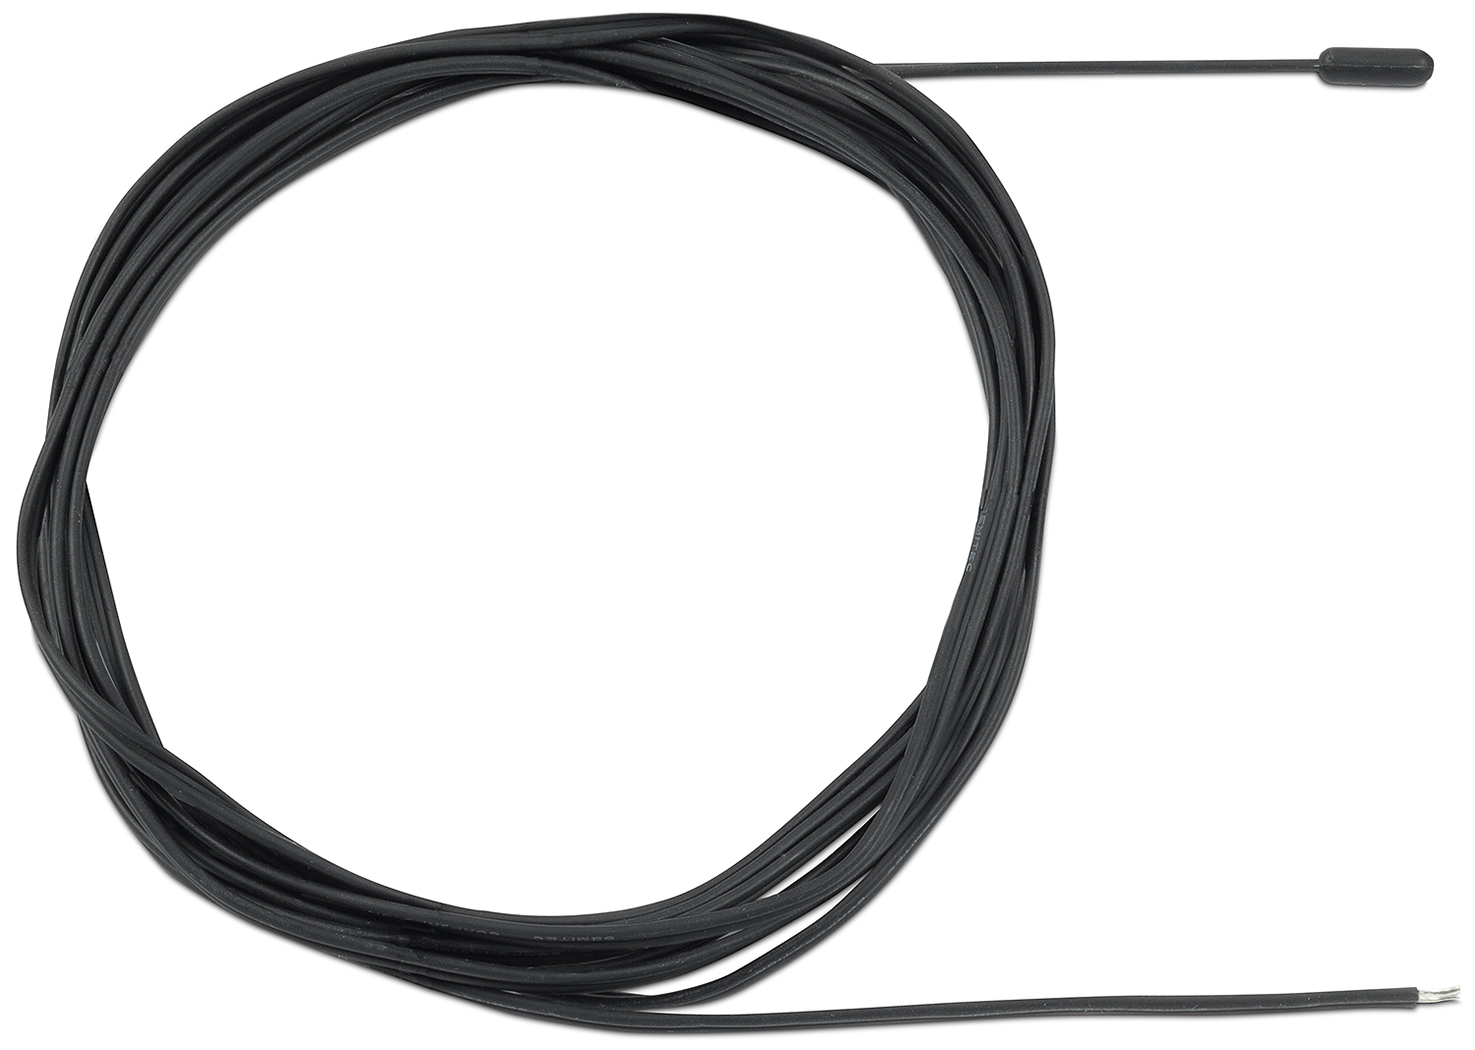 Included Thermistor Probe with 8 ft Lead Wire